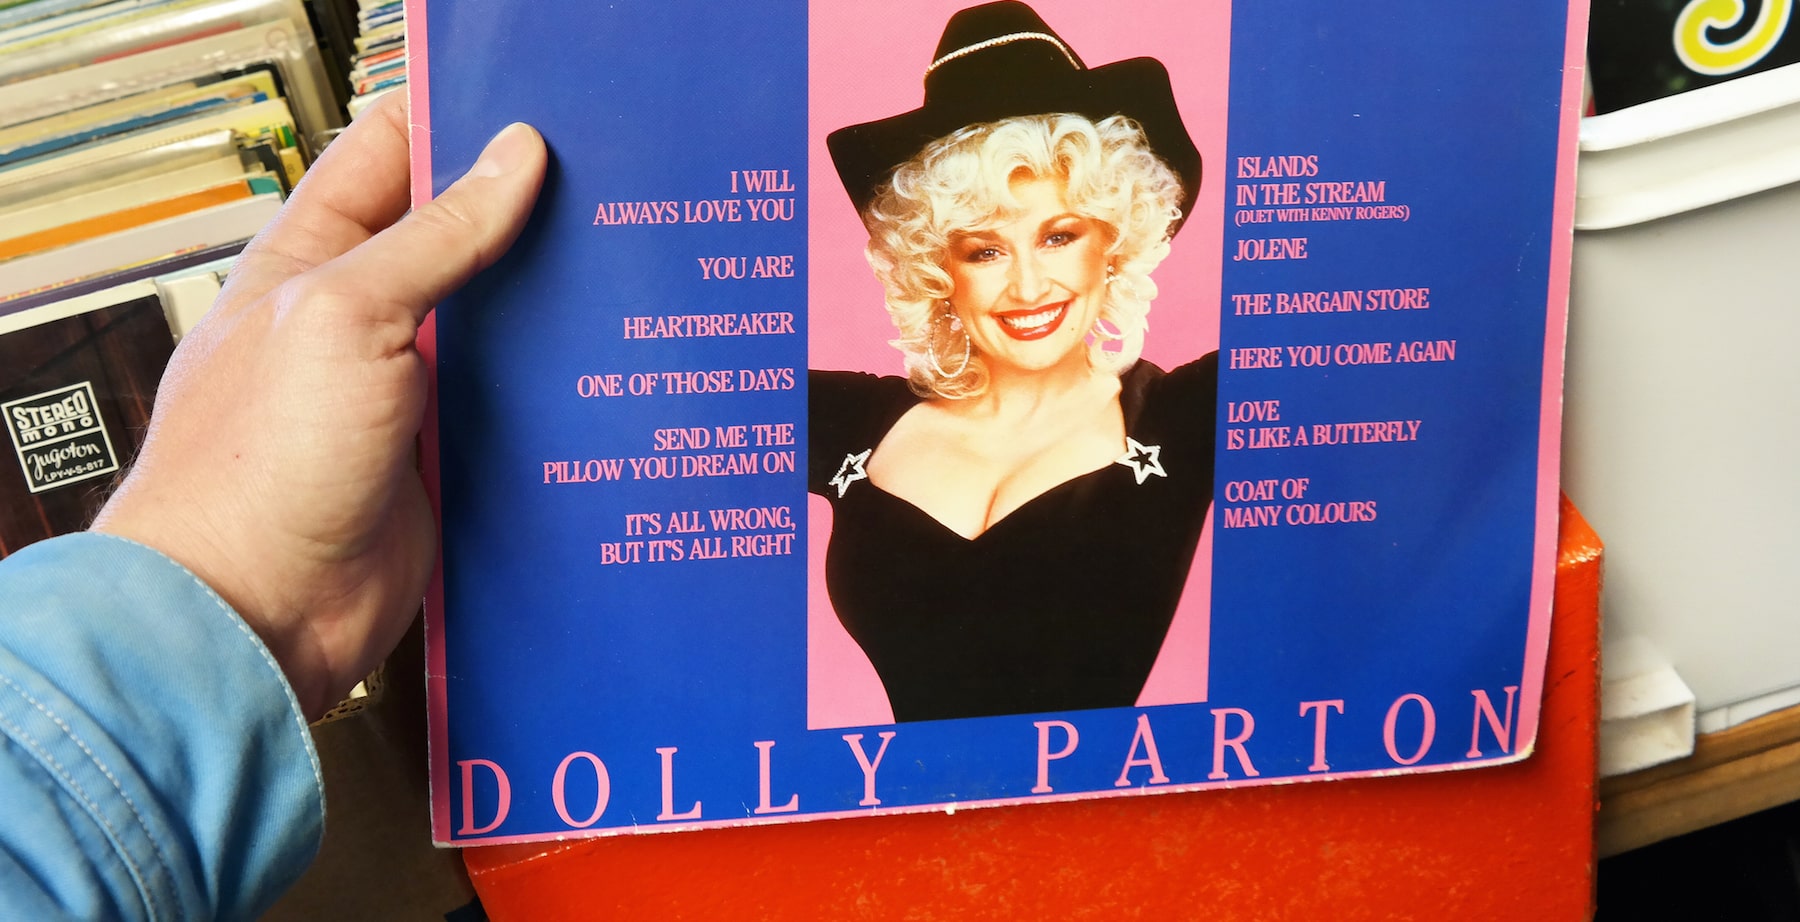 Discover if Dolly Parton had plastic surgery in the past